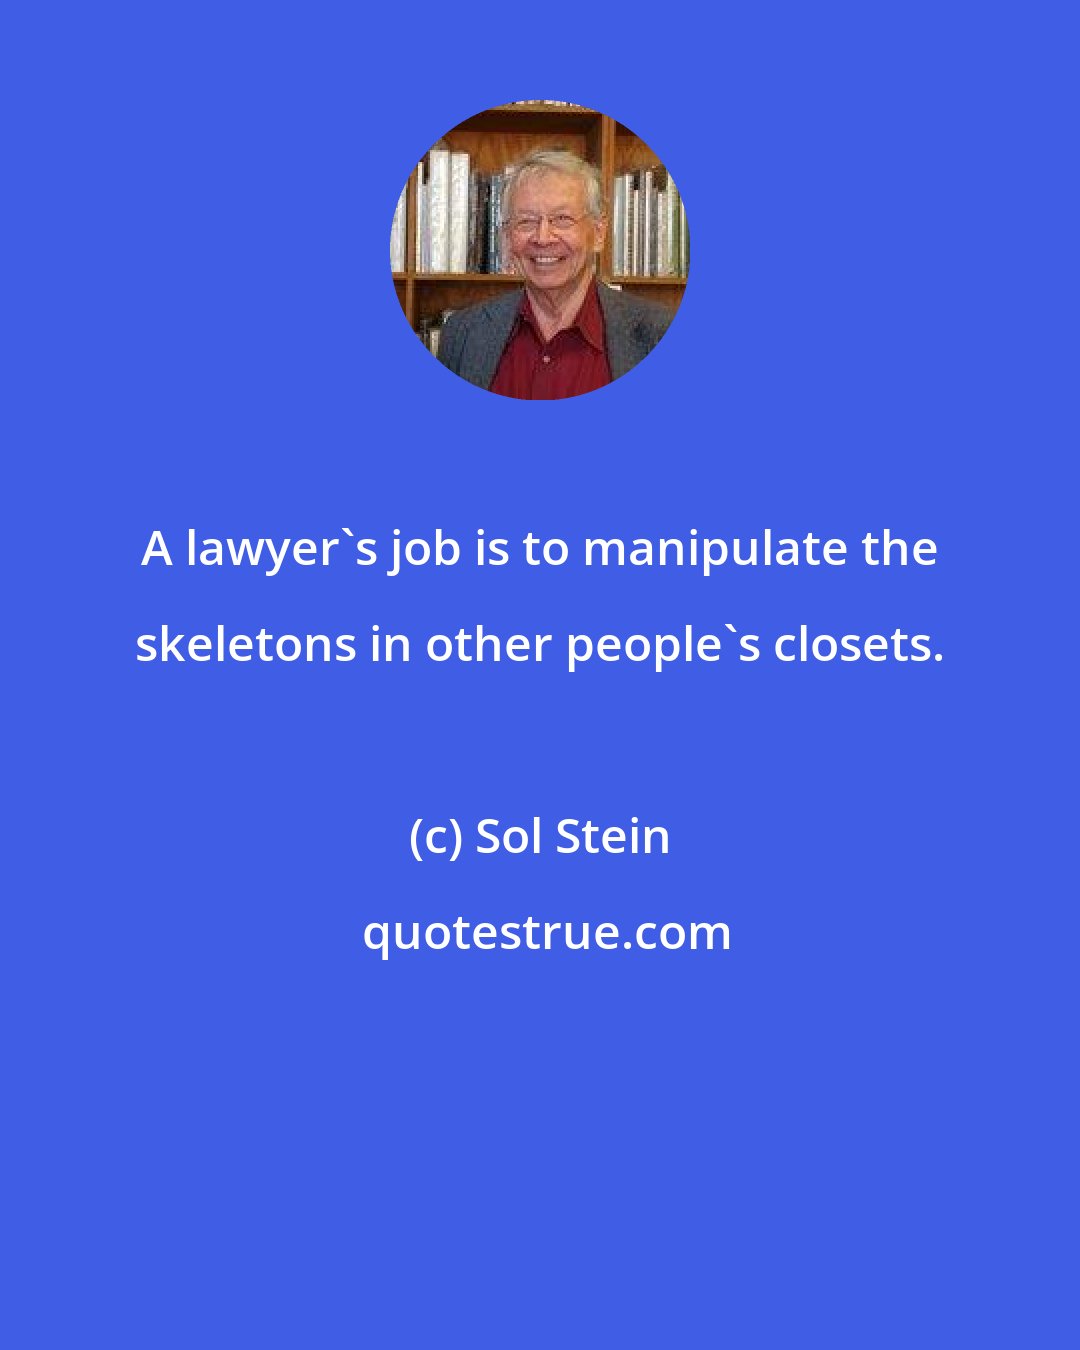 Sol Stein: A lawyer's job is to manipulate the skeletons in other people's closets.